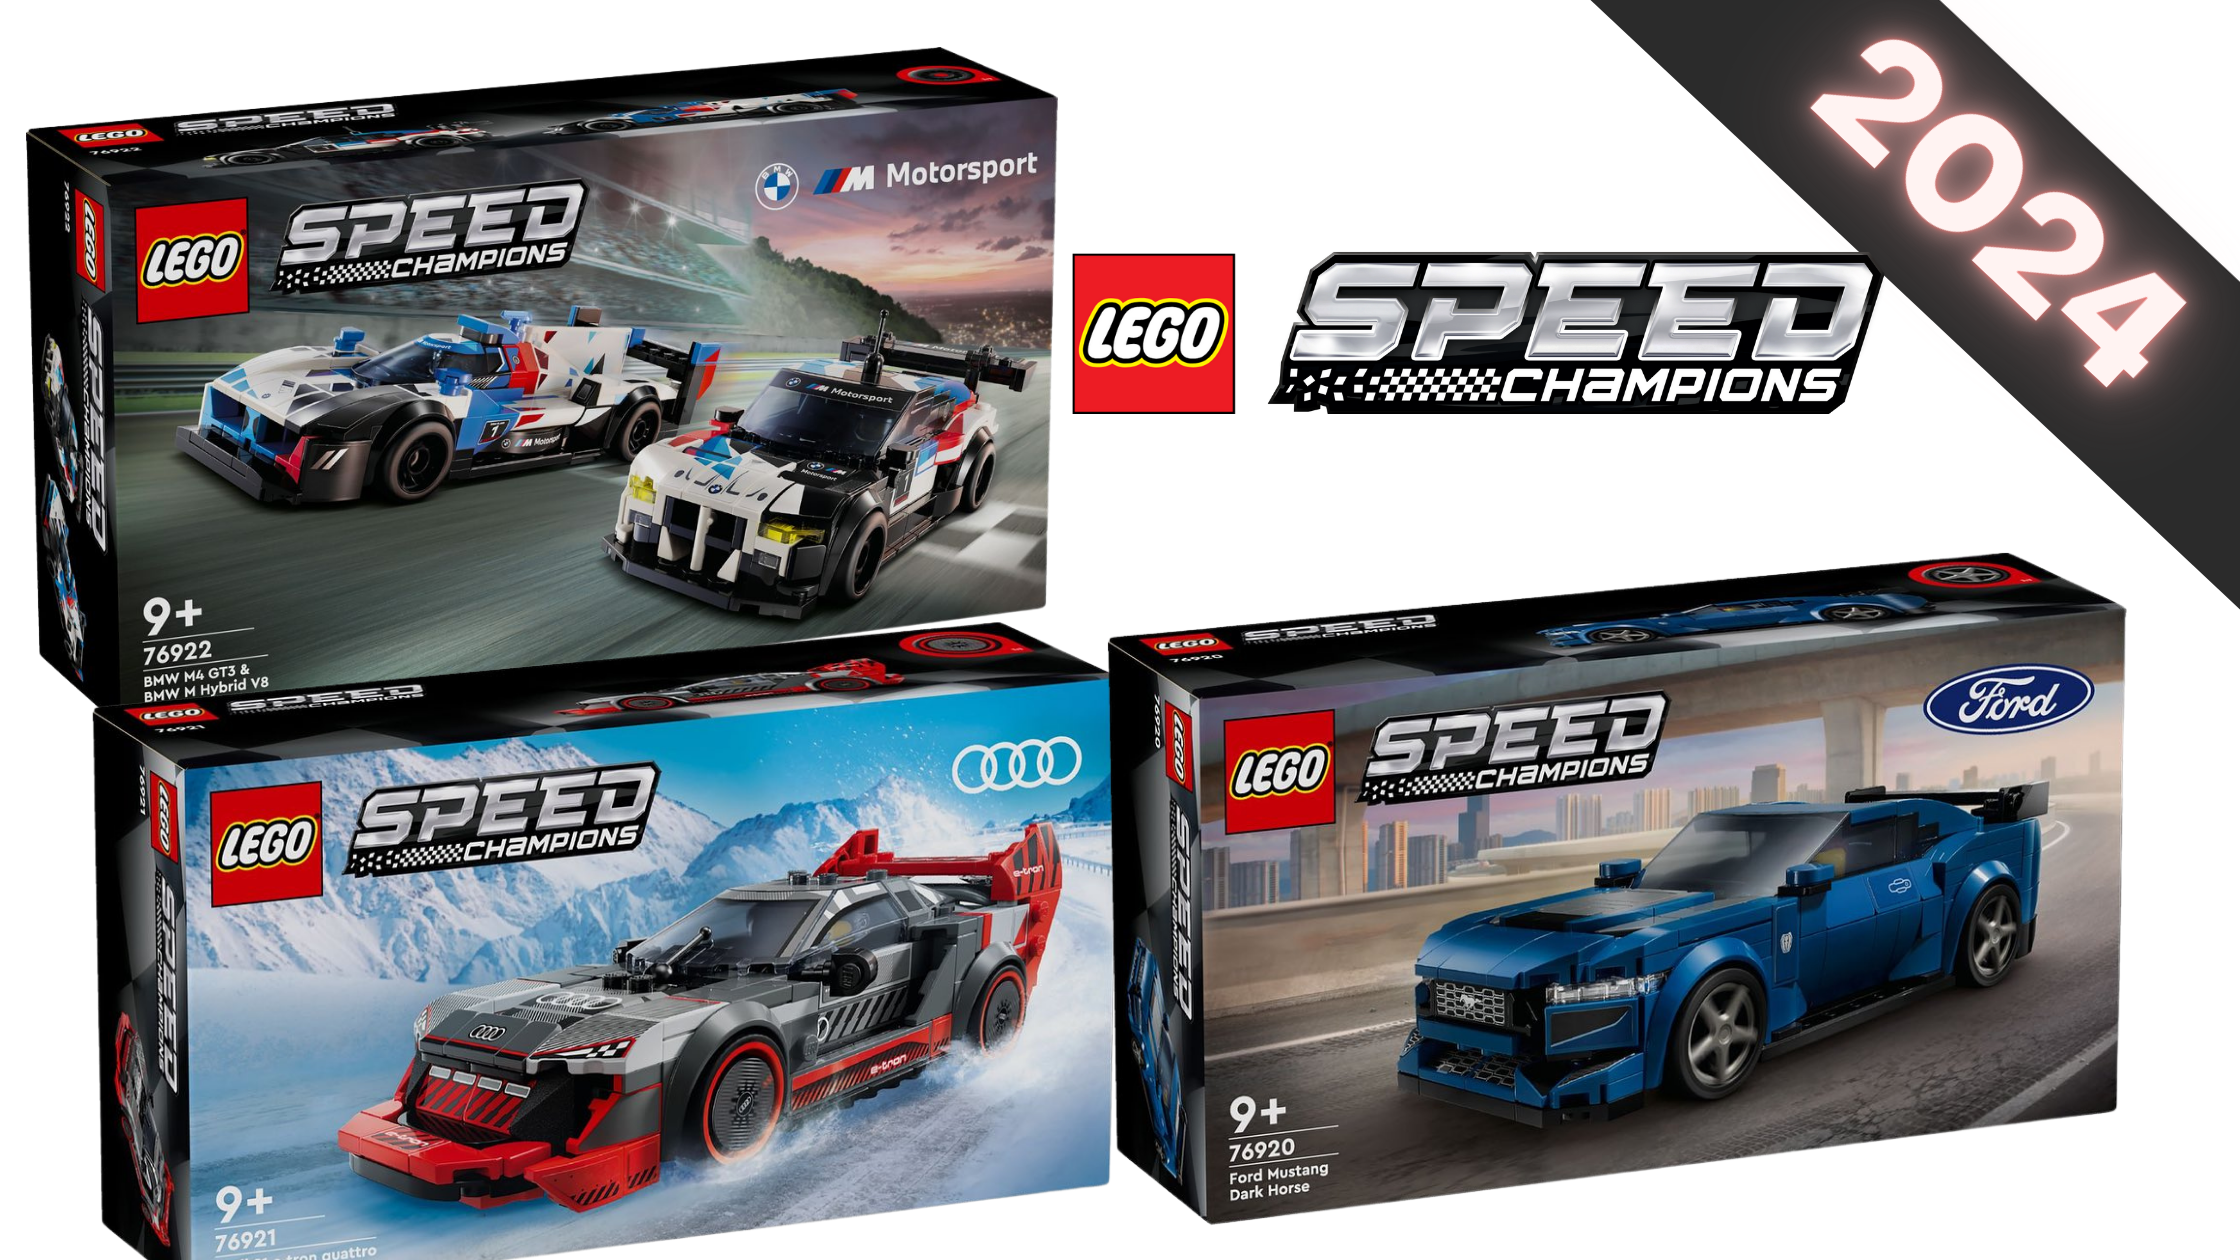 First look: The Batman (2022) LEGO and Technic sets revealed! - Jay's Brick  Blog